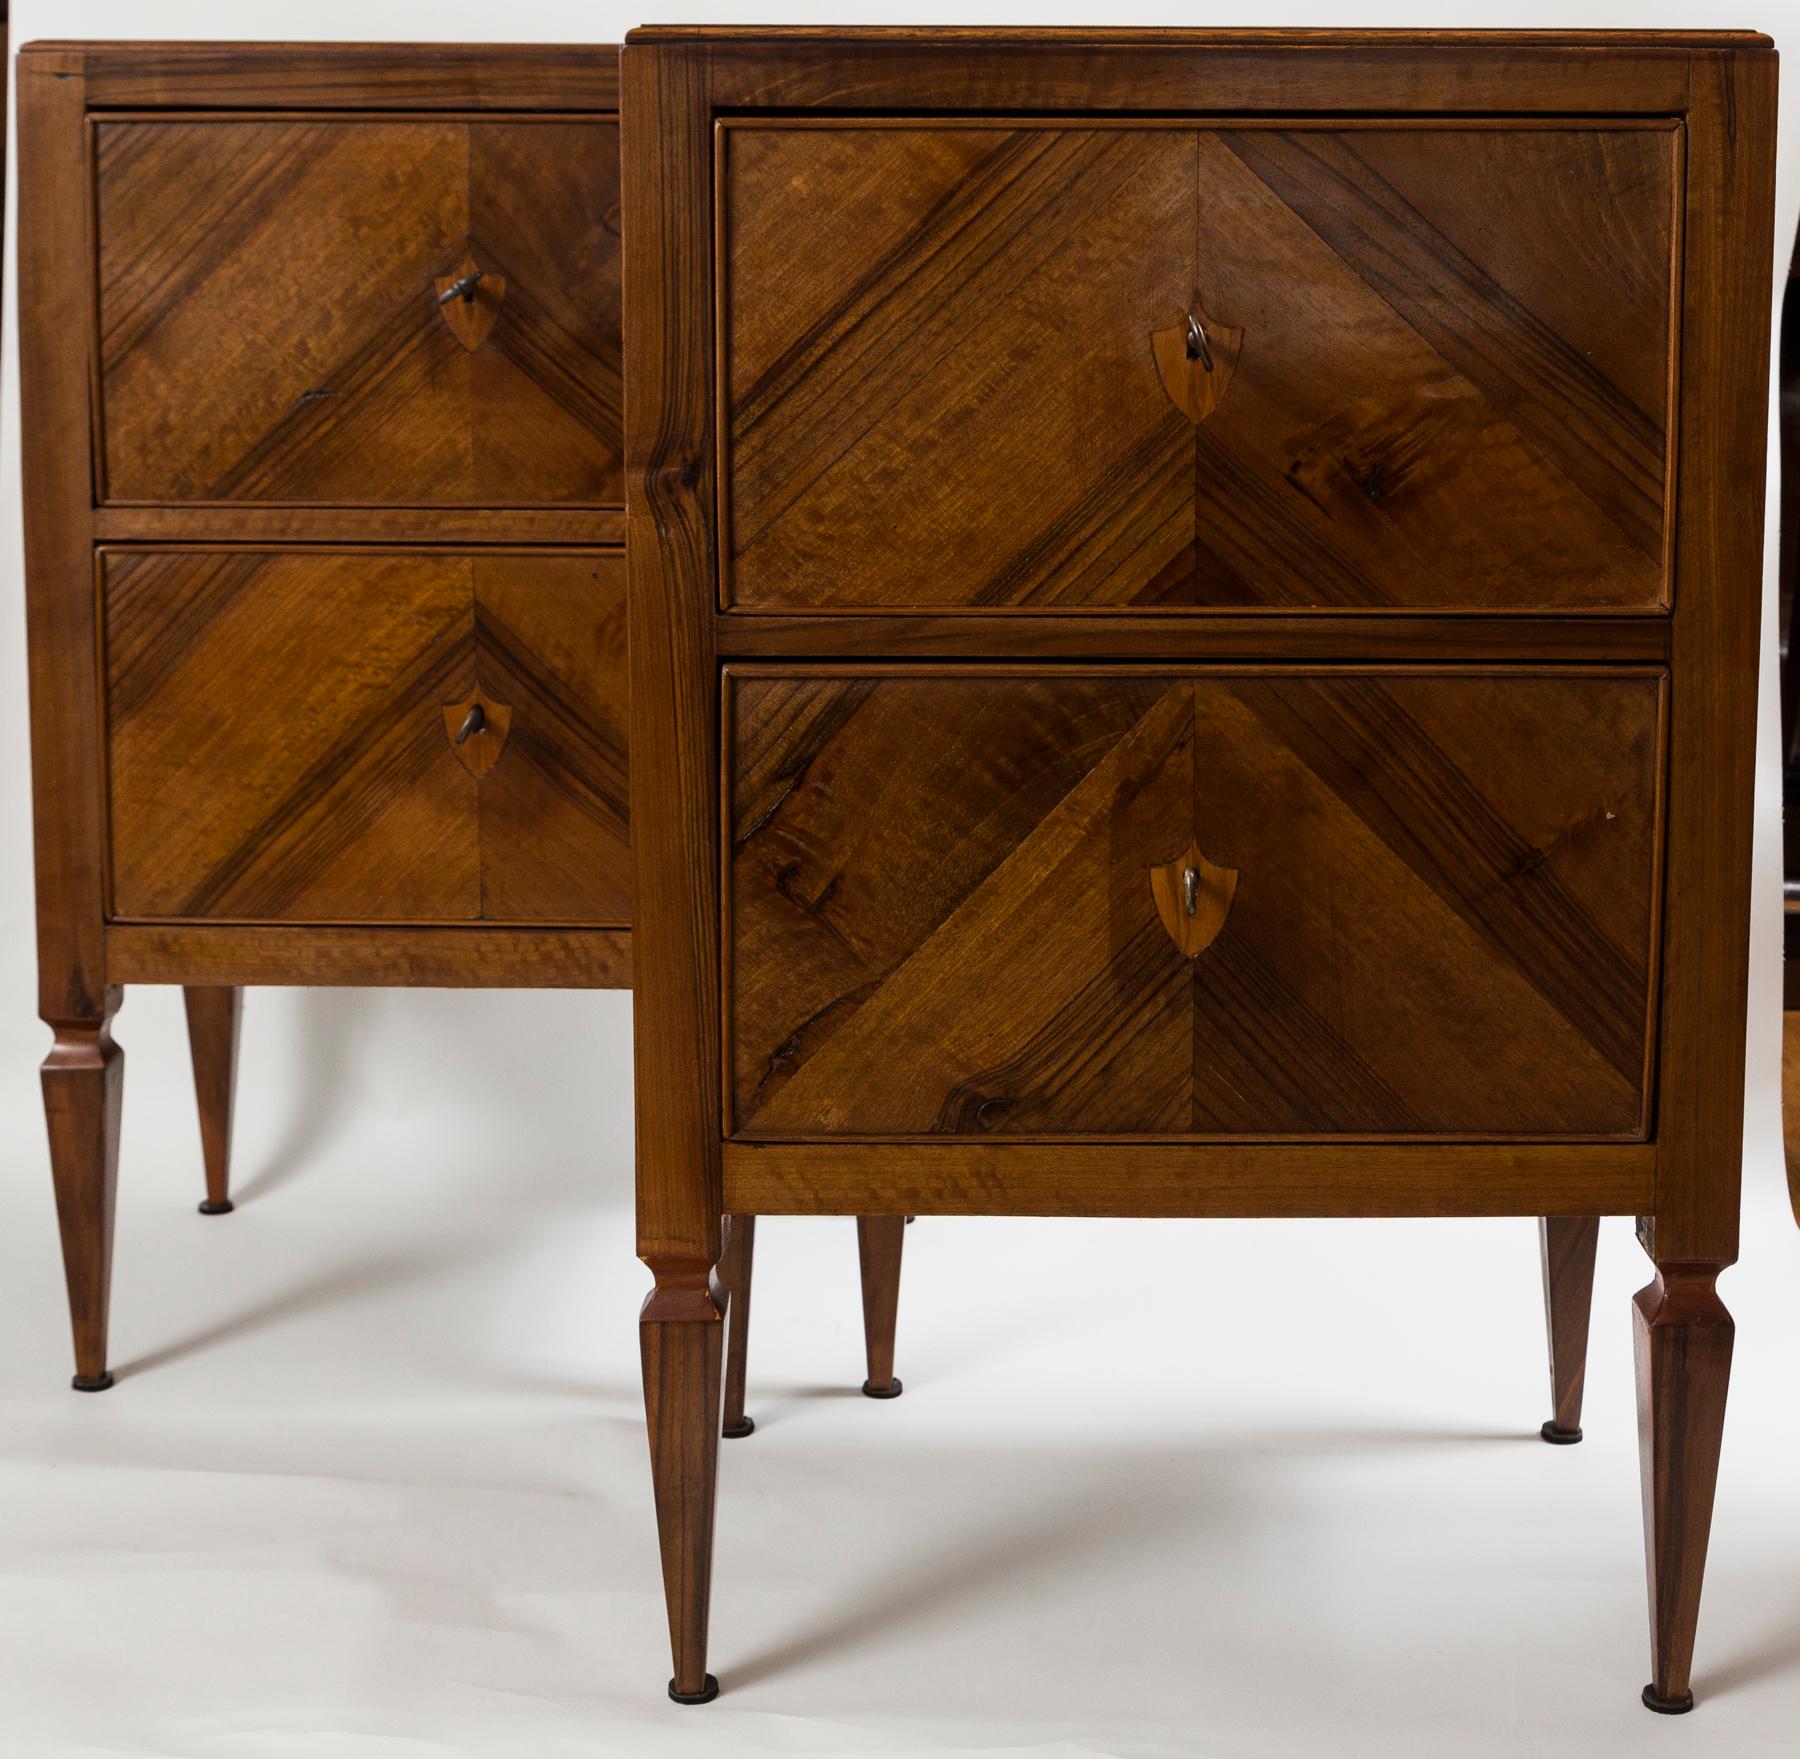  A charming pair of narrow chests comprised of 2 drawers finishing on high tapered and squared legs and embellished with  inlaid shield shaped escutcheon key holes.  Made from solid walnut with secondary wood in pine. A key provided for each